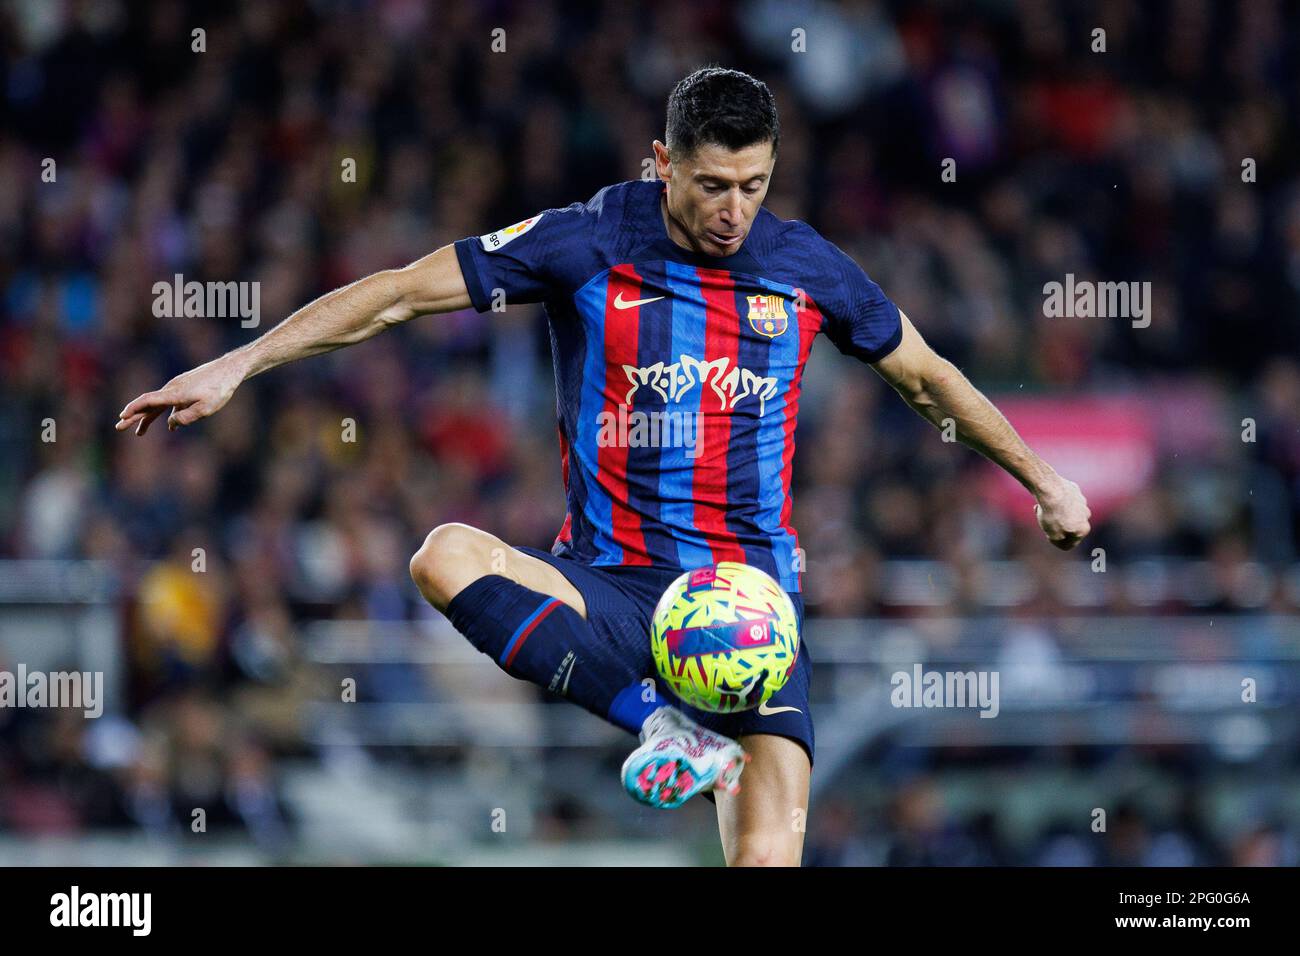 Barcelona, Spain. 19th Mar, 2023. Lewandowski in action during the LaLiga match between FC Barcelona and Real Madrid CF at the Spotify Camp Nou Stadium in Barcelona, Spain. Credit: Christian Bertrand/Alamy Live News Stock Photo